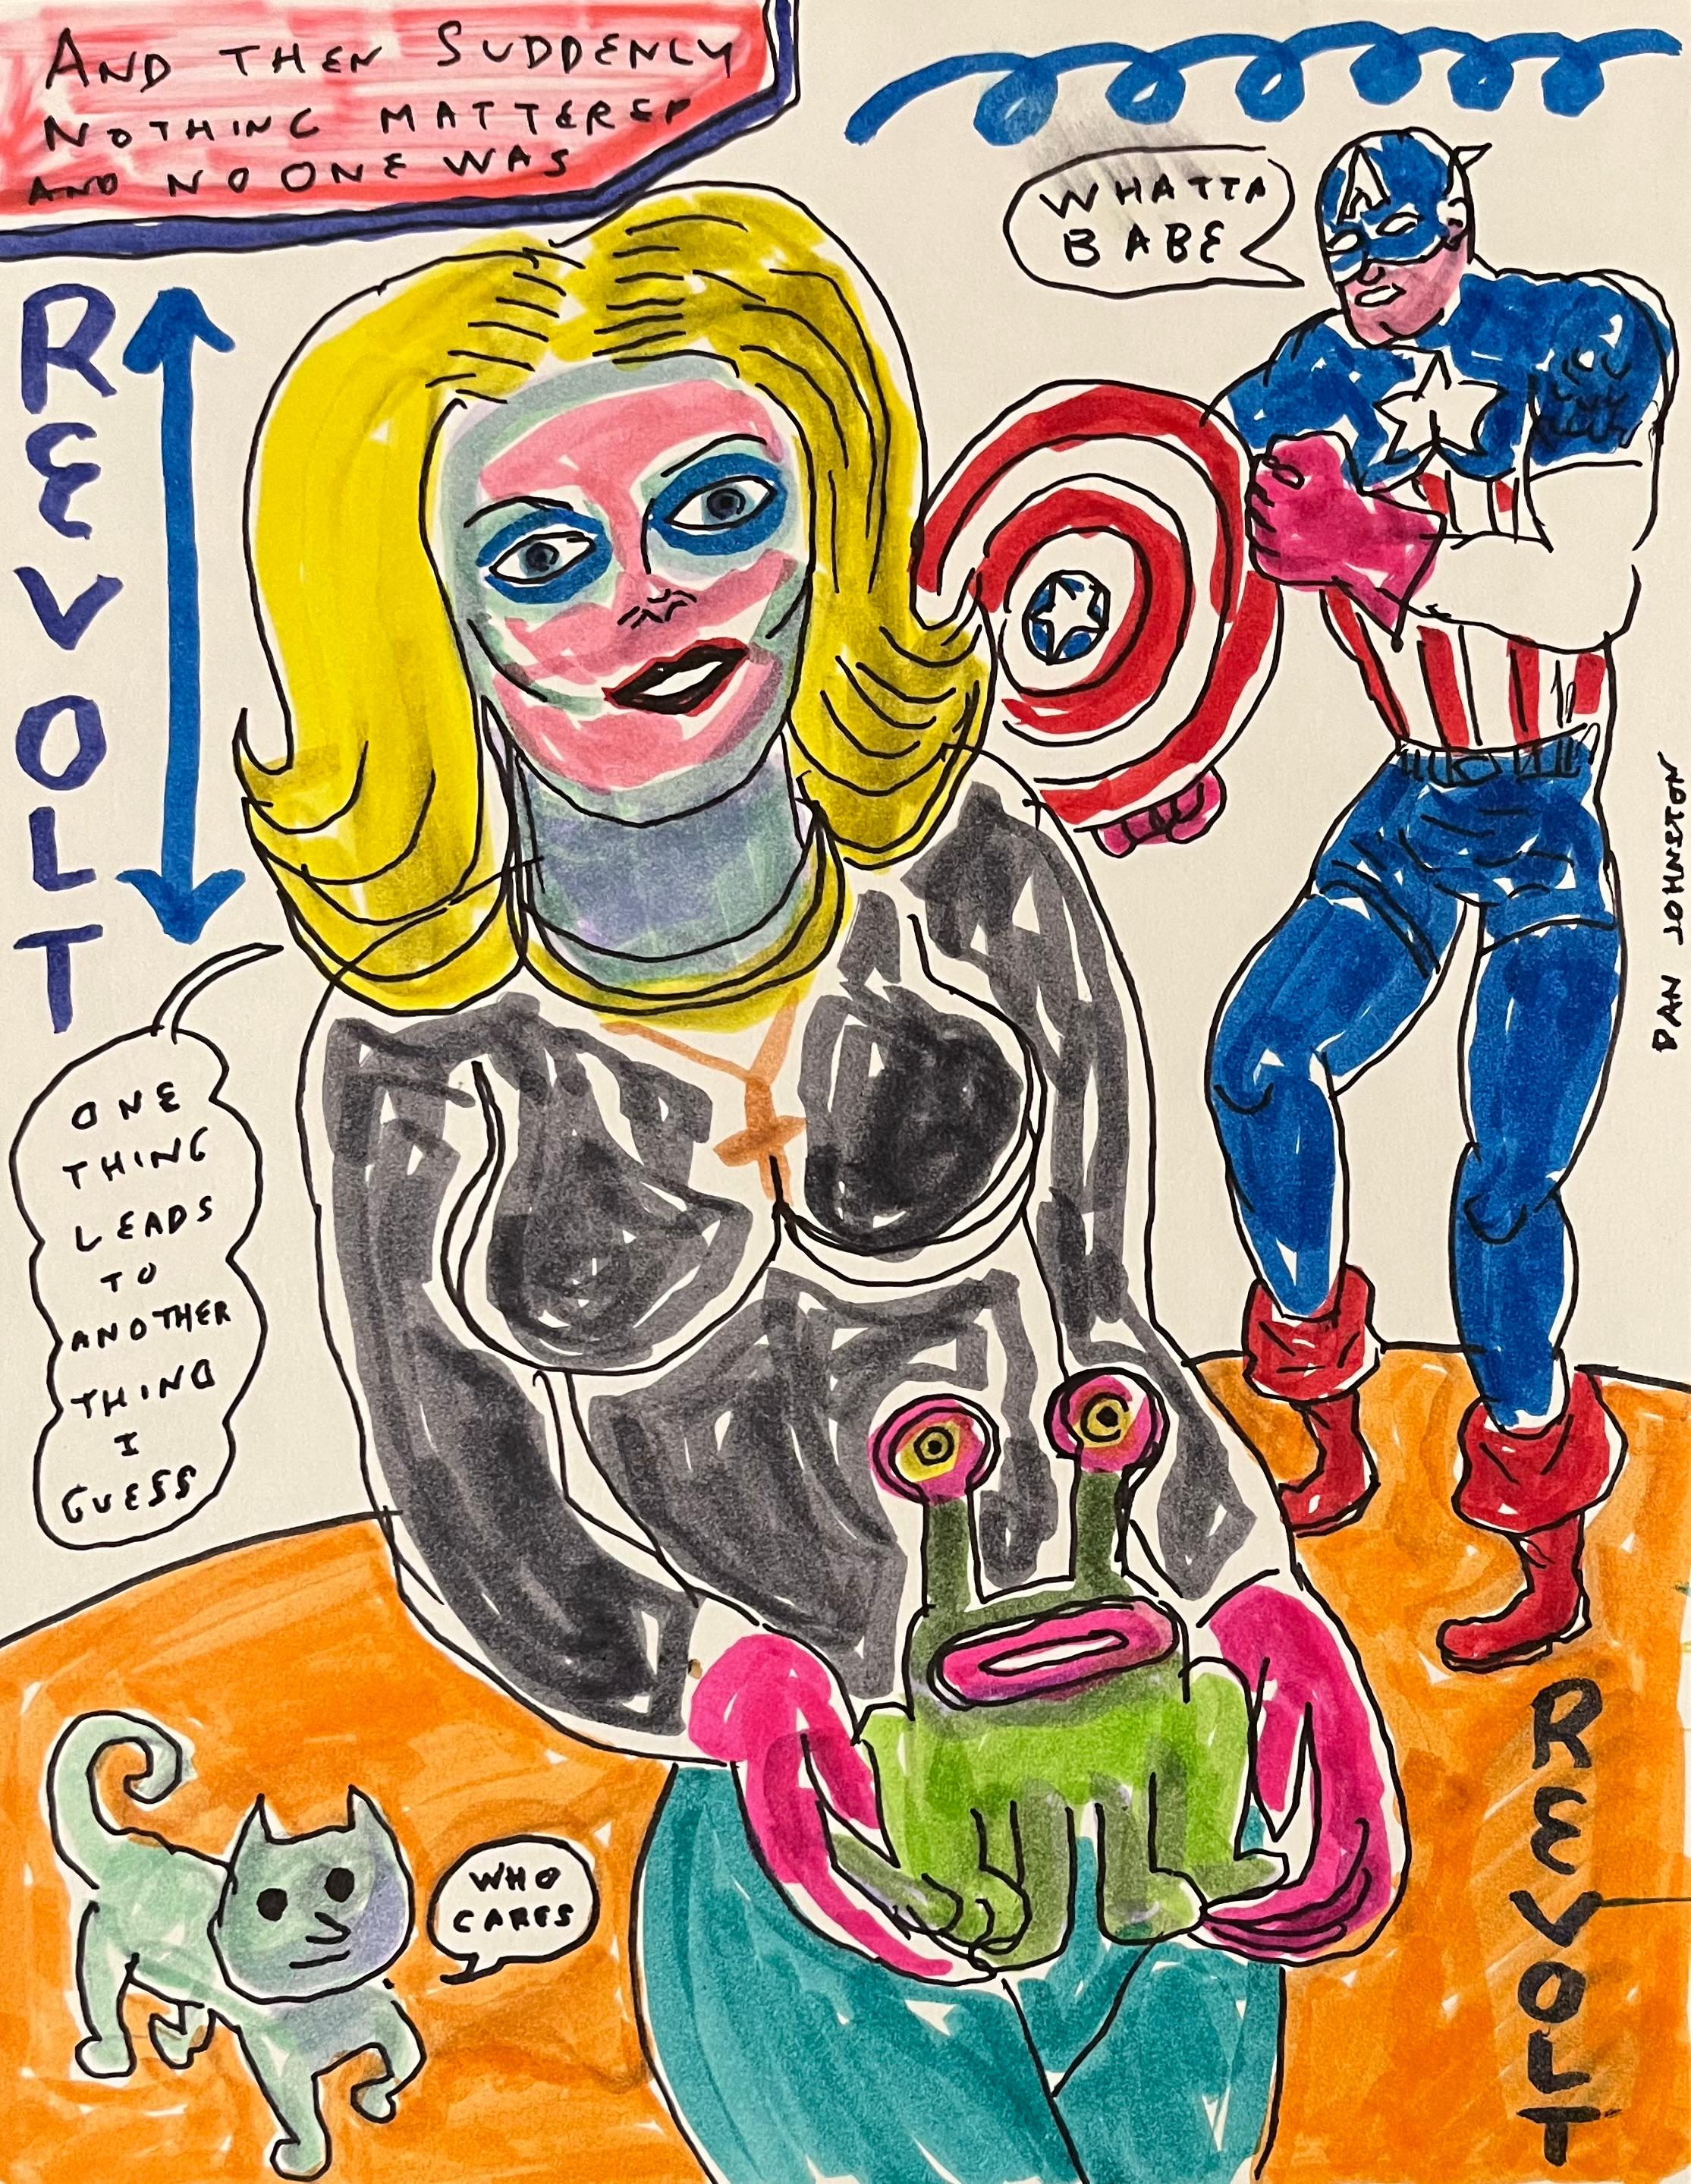 Daniel Johnston Animal Art - And Then Suddenly Nothing Matters - Figure Ink Drawing on Paper, Outsider Artist